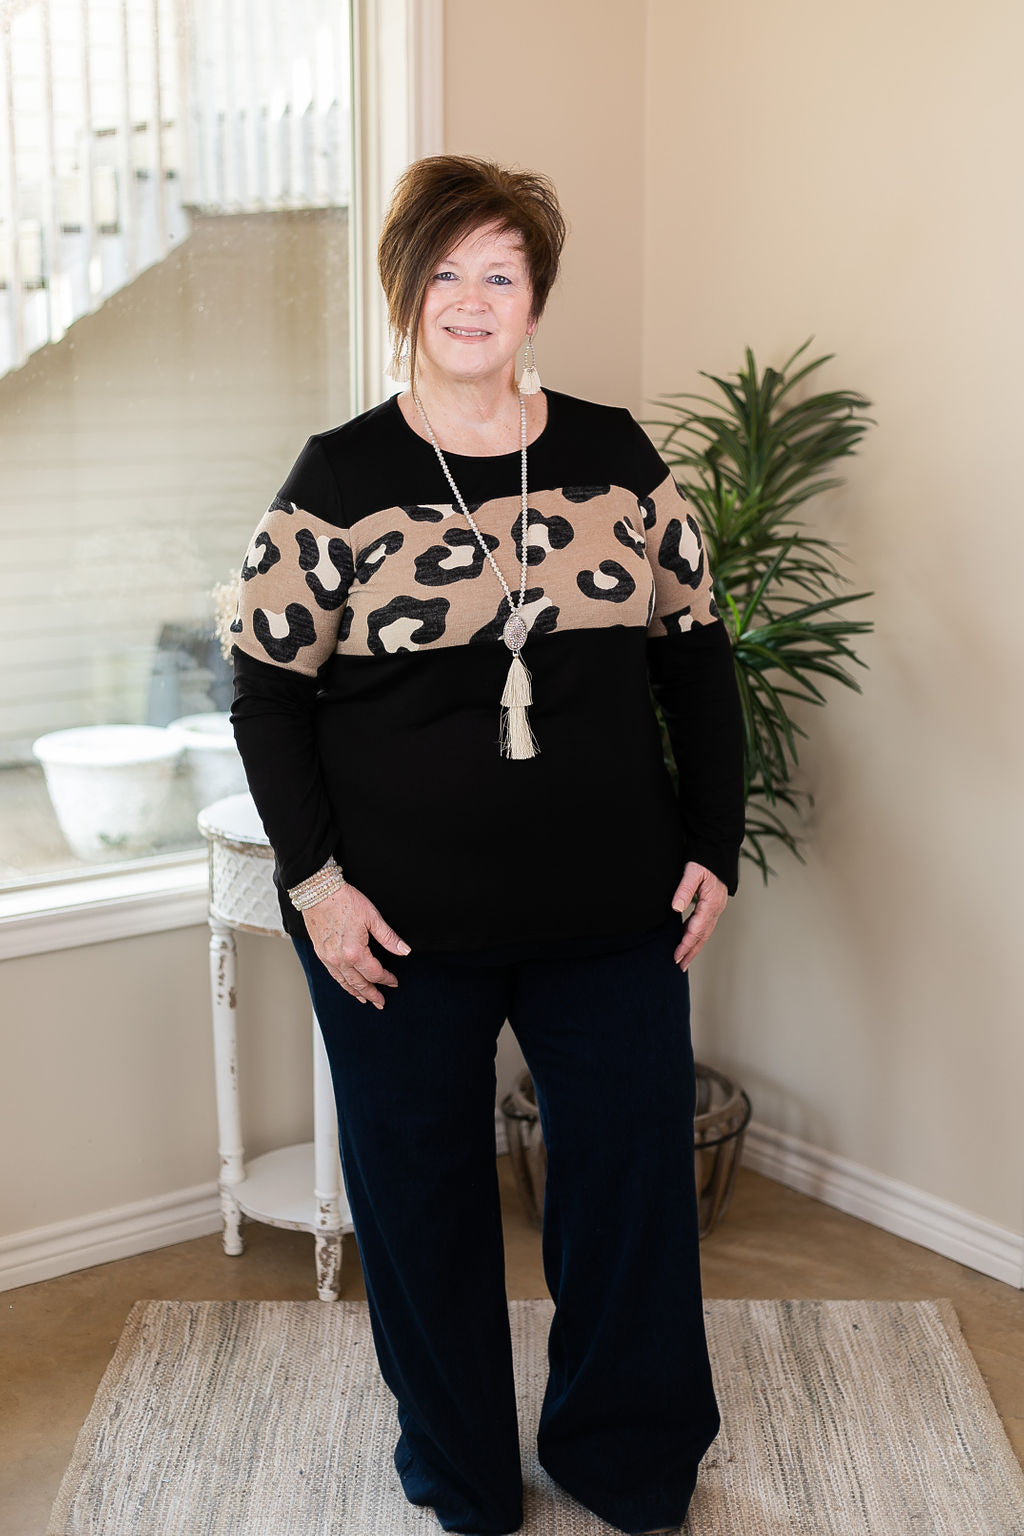 One Way Ticket Wild Leopard Bust Long Sleeve Top in Black - Giddy Up Glamour Boutique